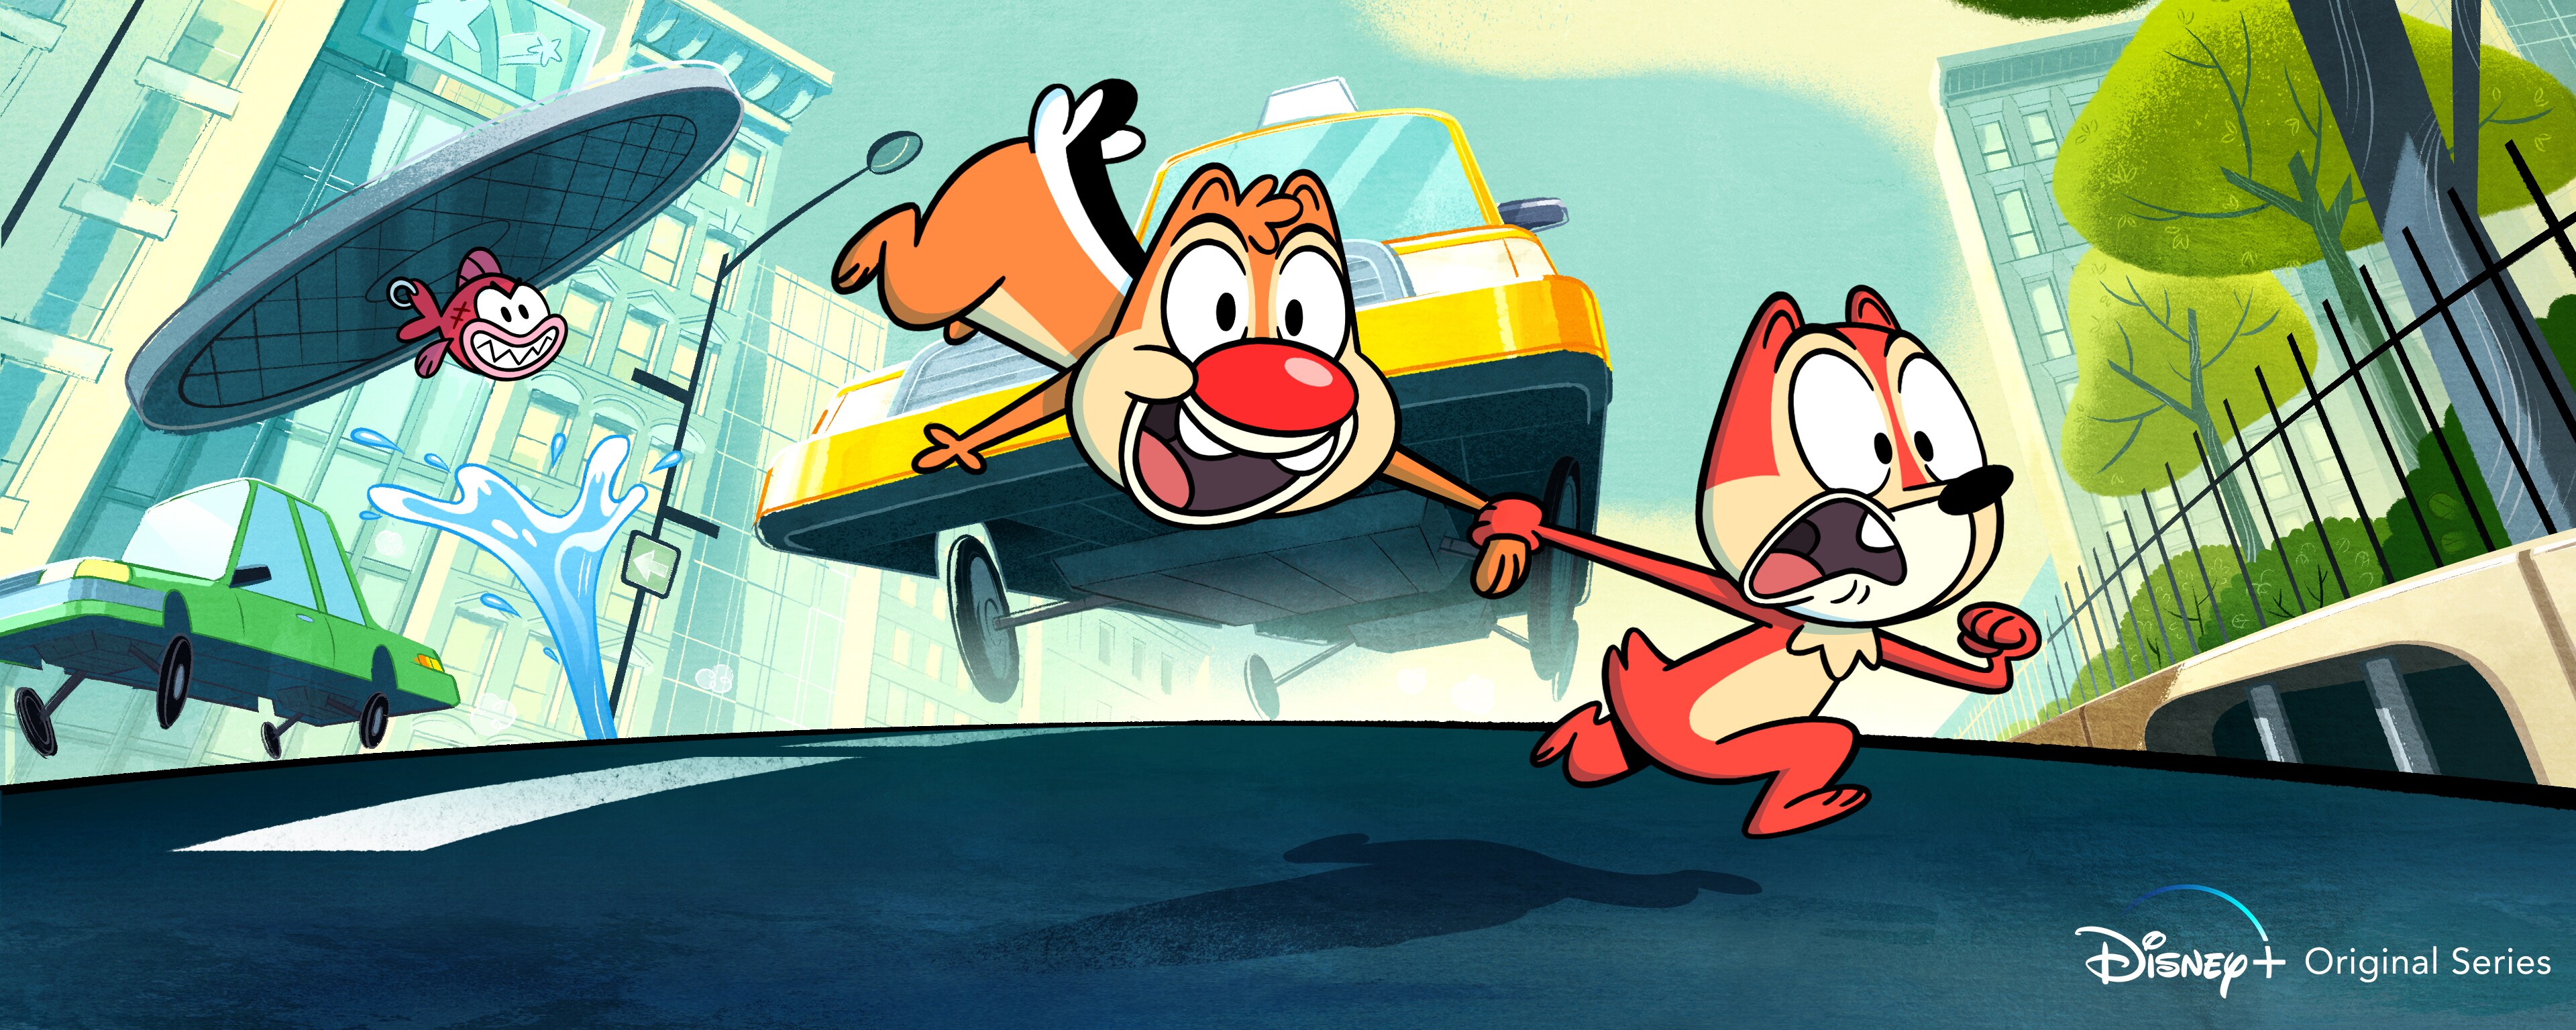 Disney+ Announces Original Series “Chip ‘n’ Dale ” is in Production, Reveals "Monsters At Work" Logo at Annecy International Animated Film Festival